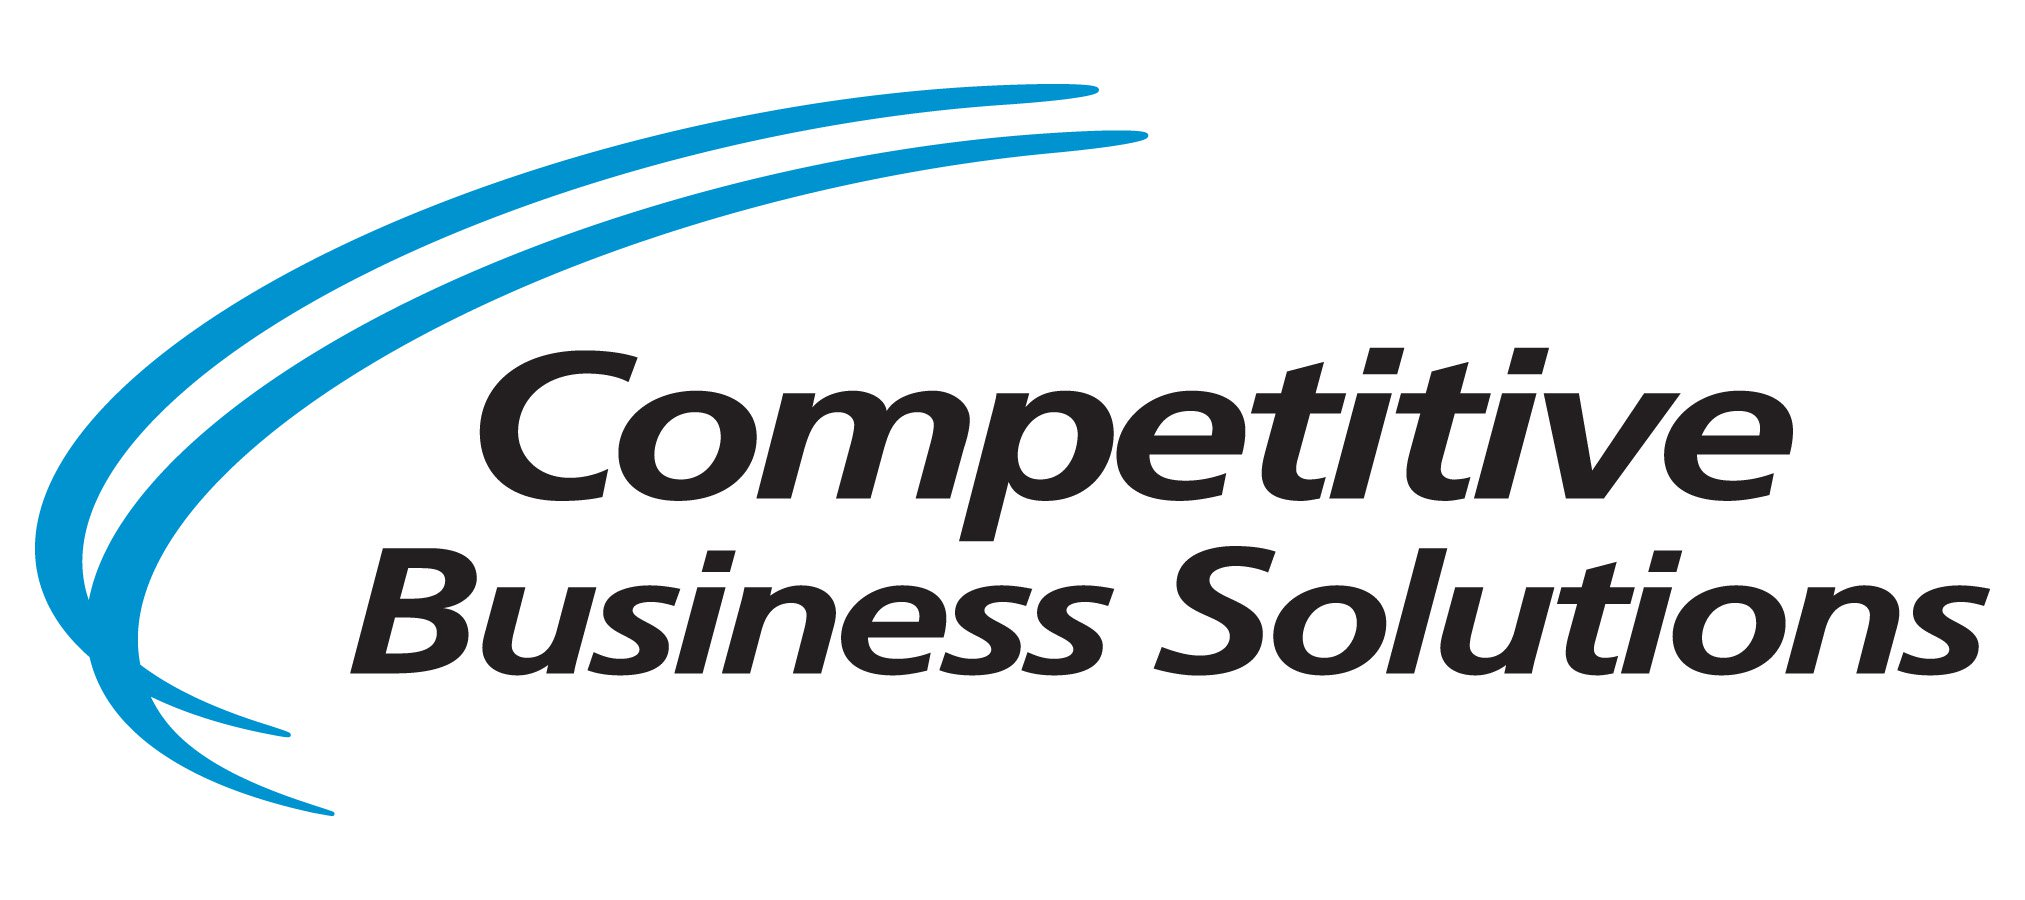 Competitive Business Solutions, Wednesday, August 21, 2019, Press release picture